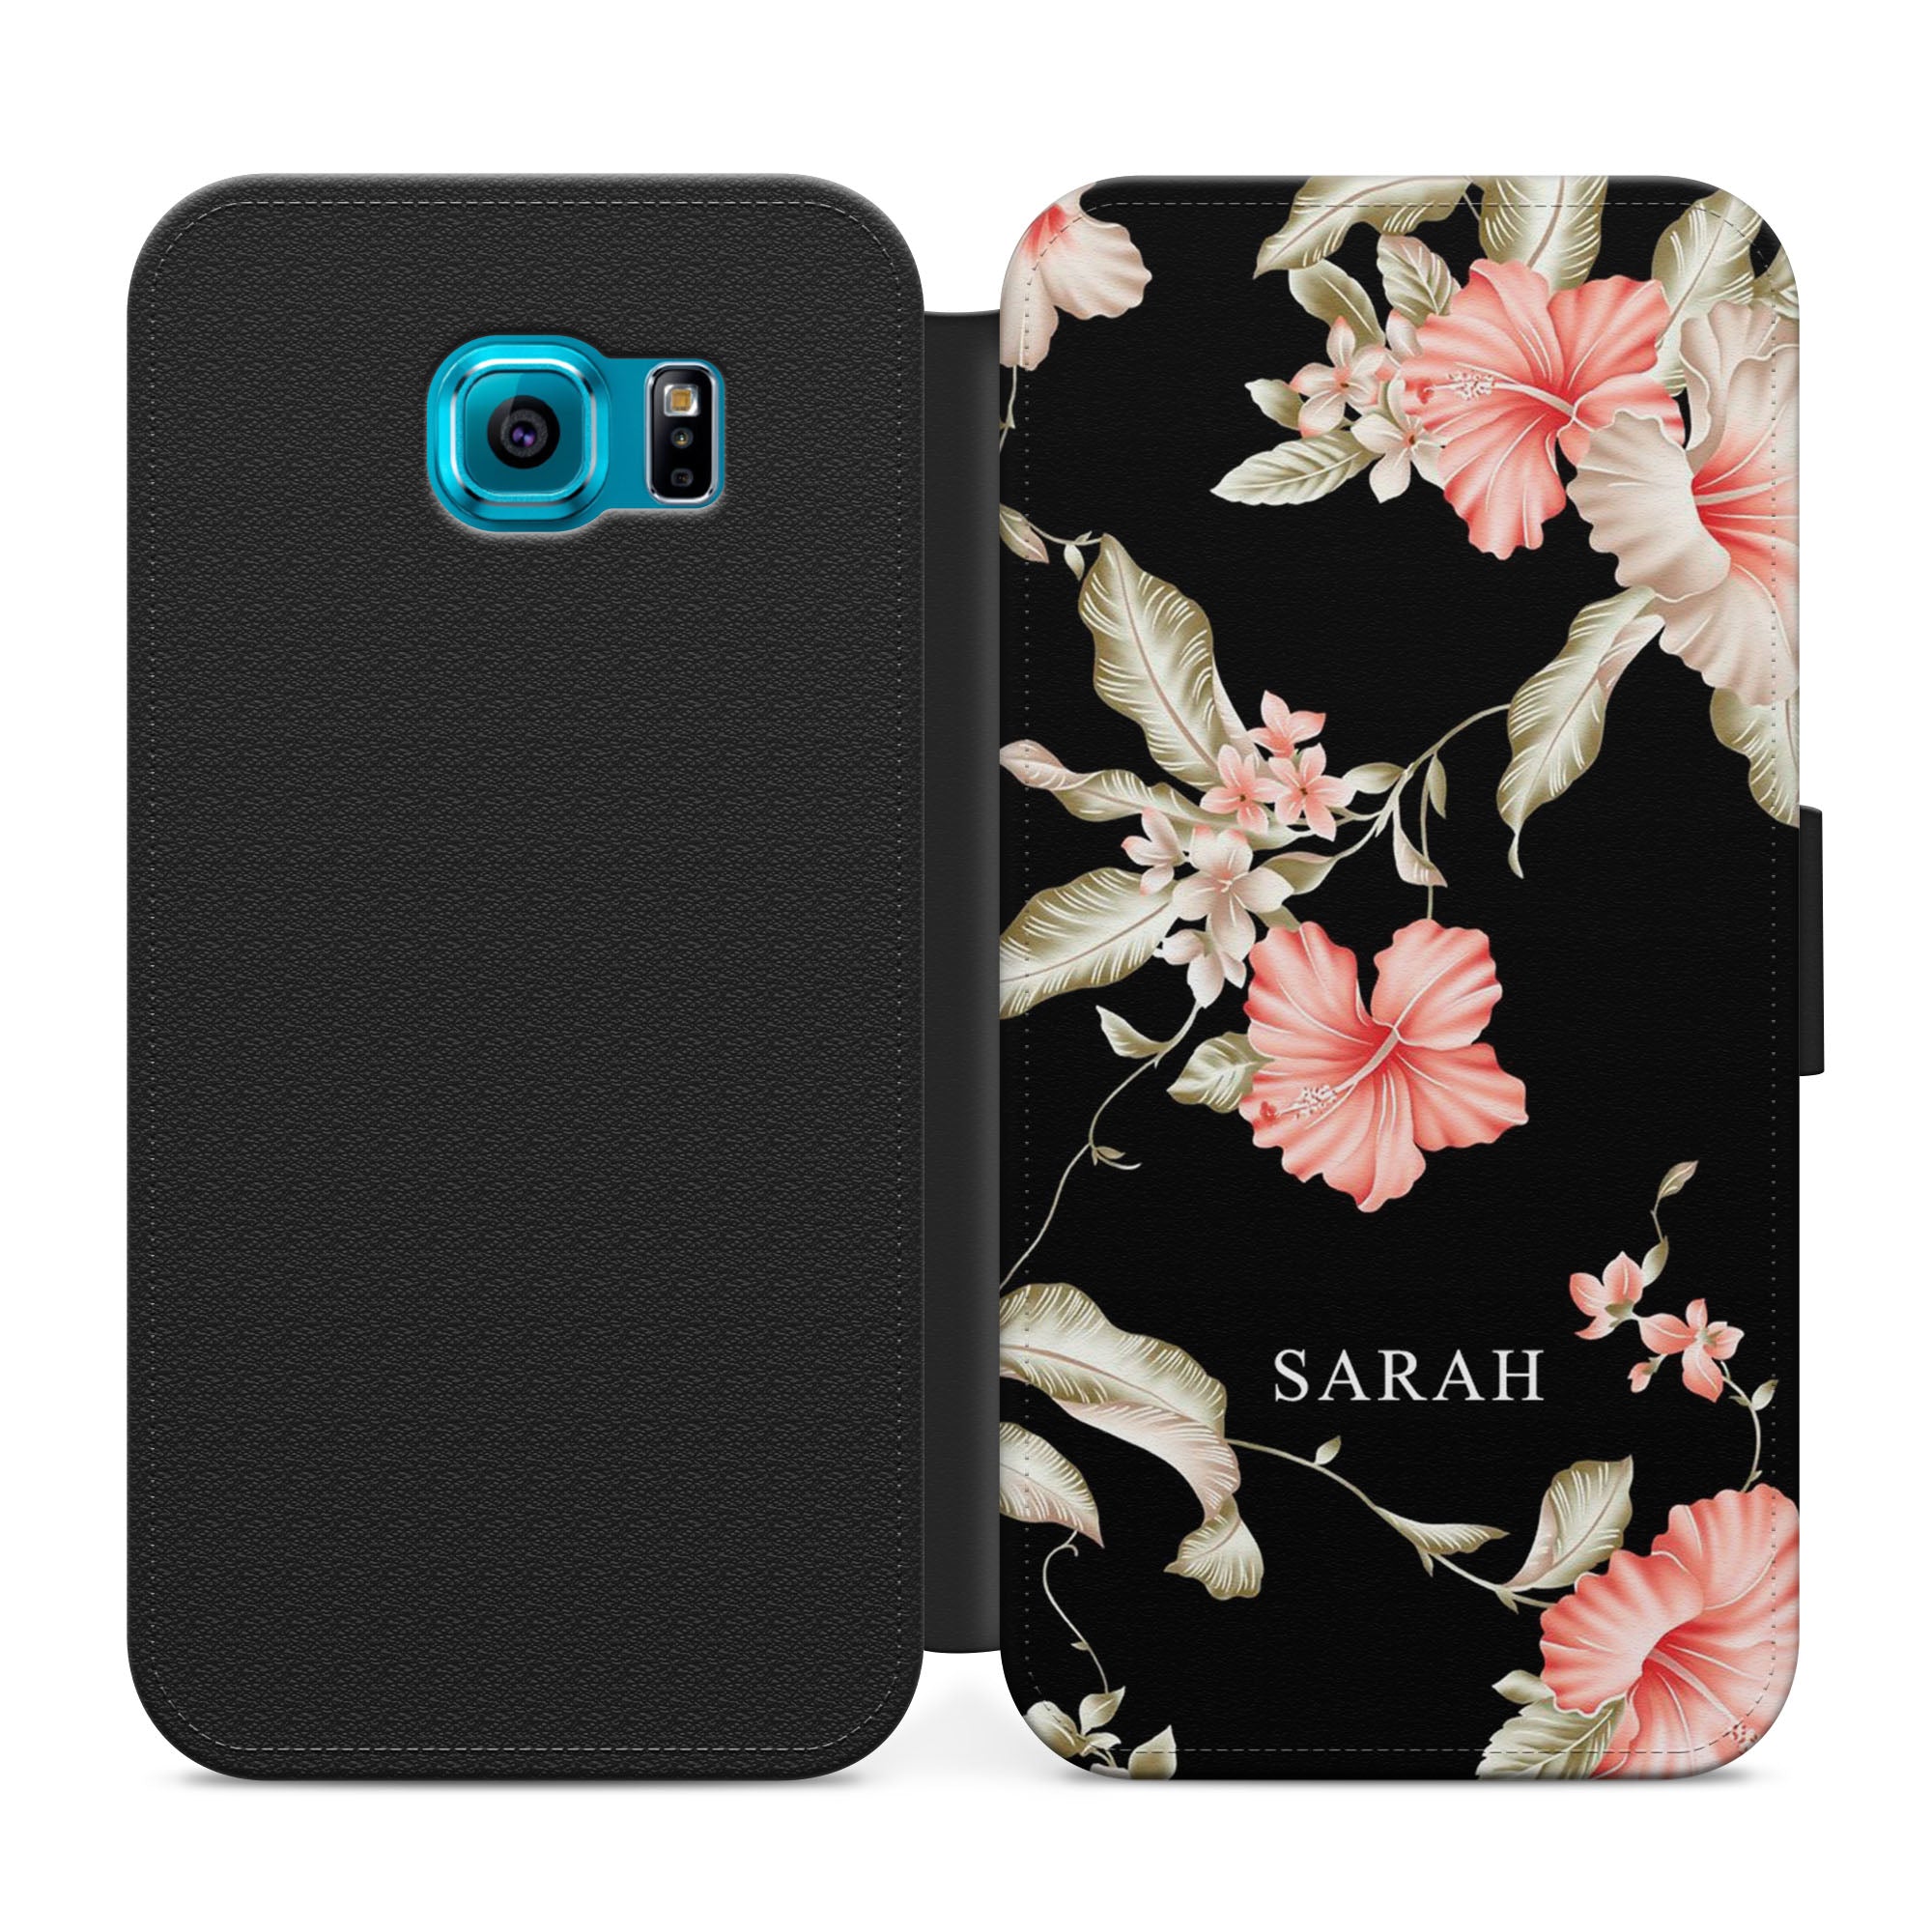 Personalised Black Floral Faux Leather Flip Case Wallet for iPhone / Samsung